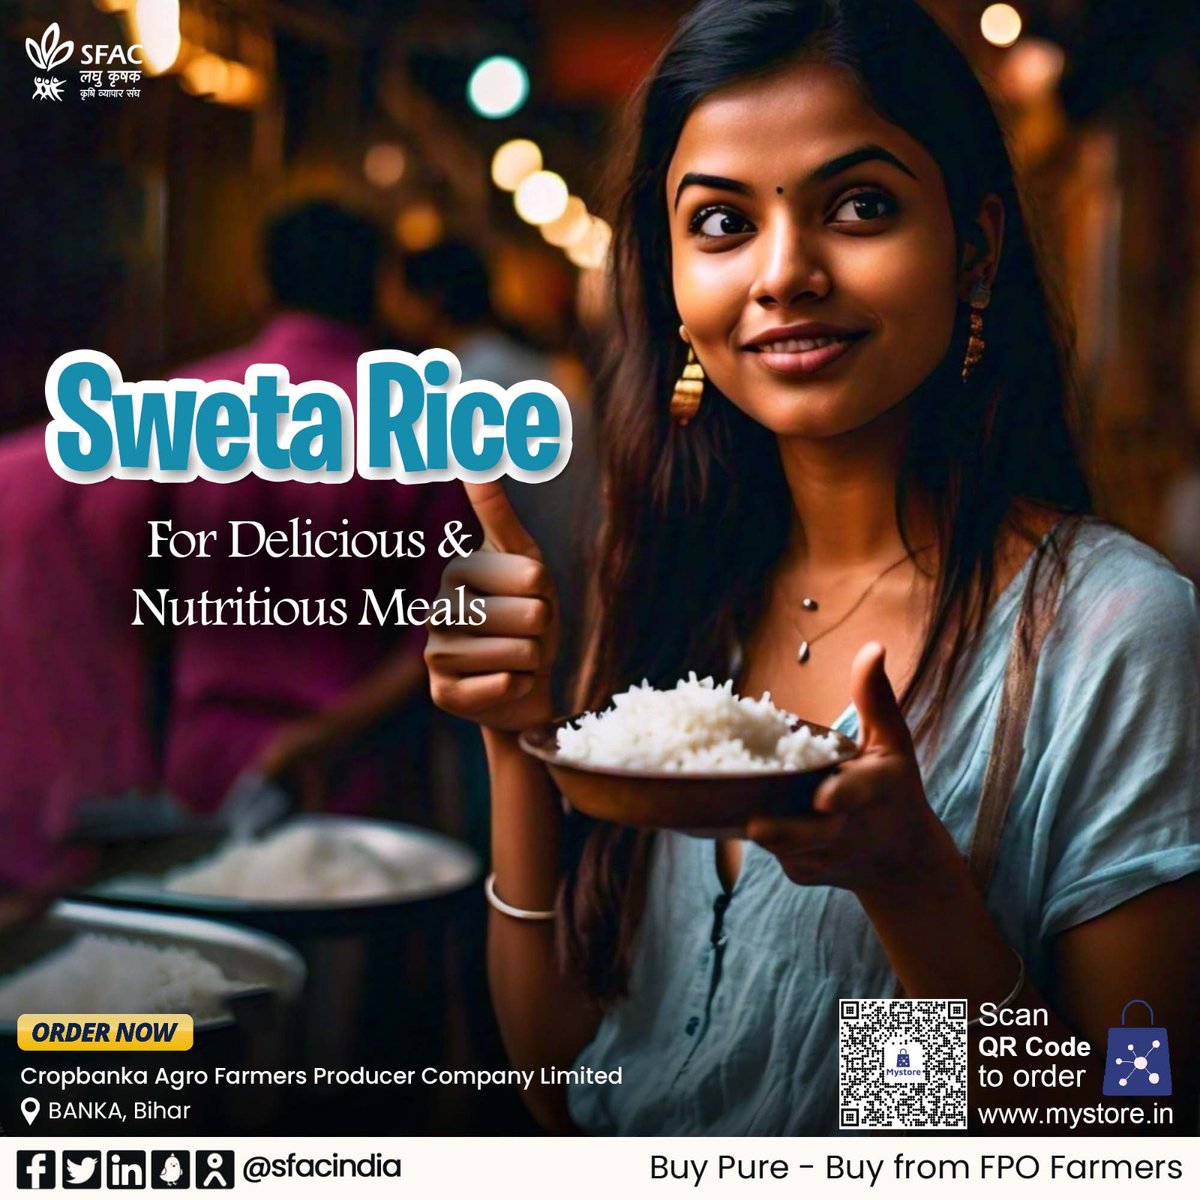 Soft, nutritious, delicious Shweta rice. Perfect for summer meals. Buy straight from FPO farmers at👇 mystore.in/en/product/ric… 🍚 @AgriGoI @ONDC_Official @PIB_India @mygovindia #VocalForLocal #healthyeating #healthyhabits #healthychoices #tastyrecipes #tastybite #HealthyFood